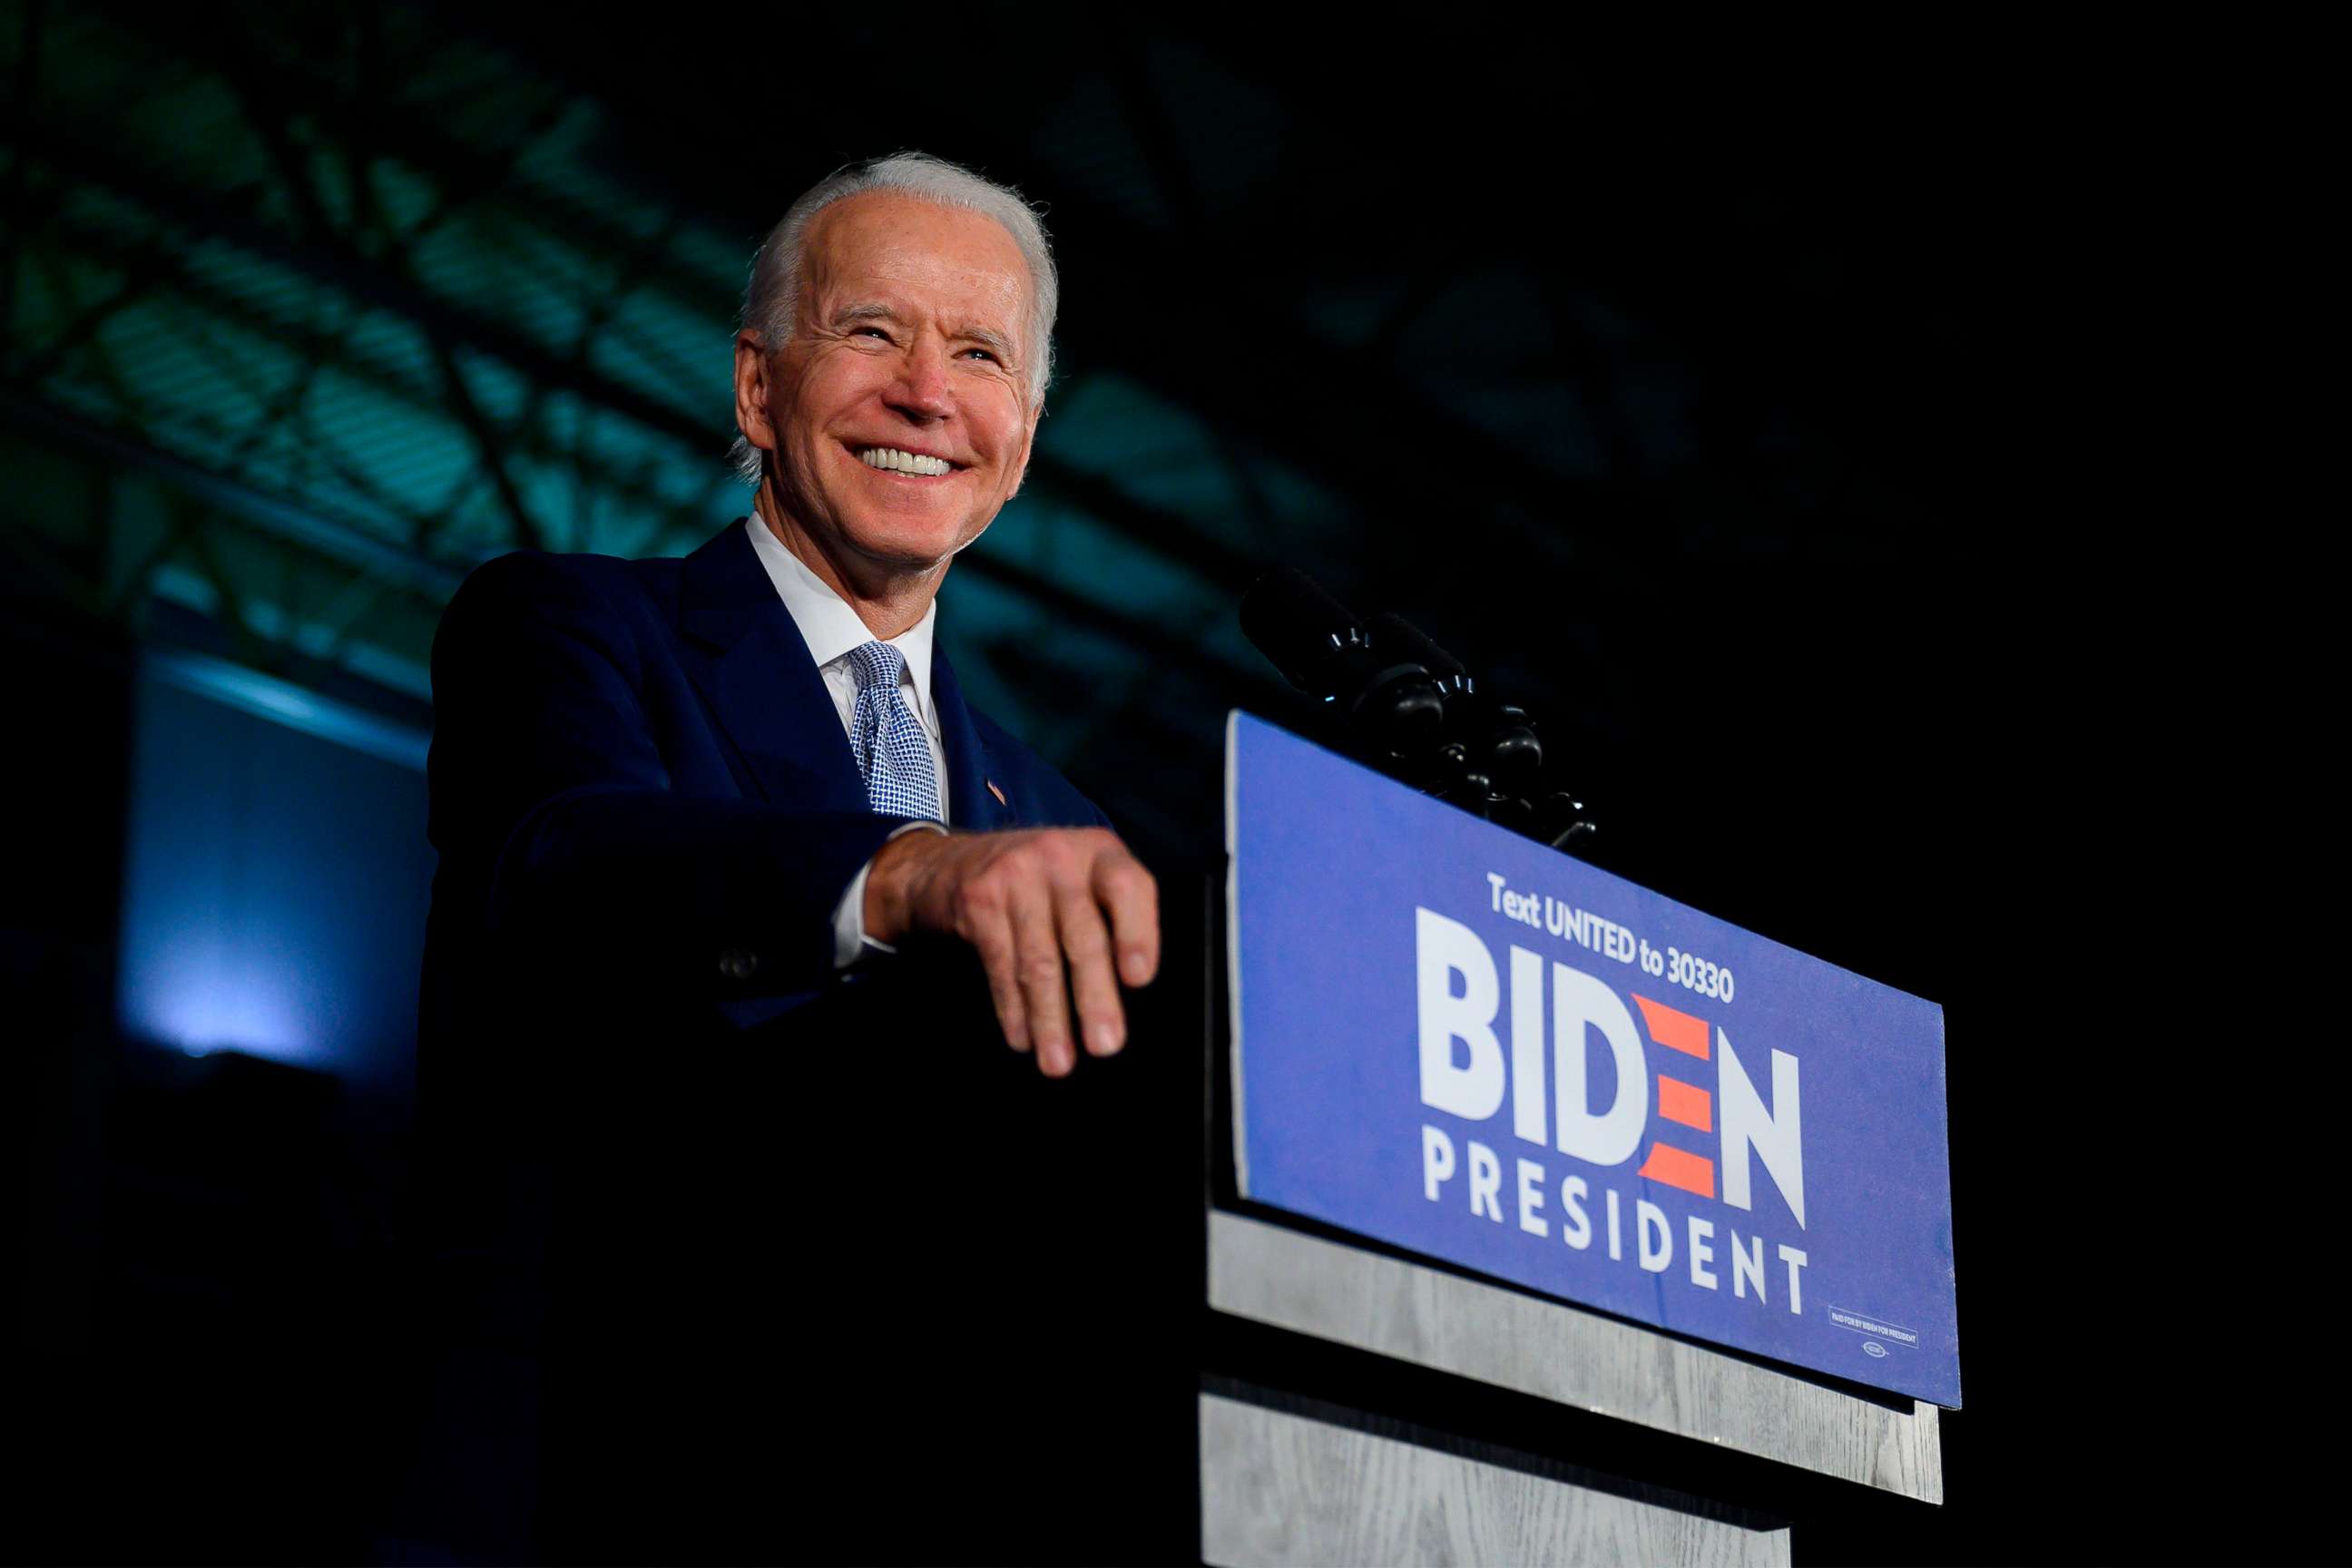 PHOTO: Democratic presidential candidate Joe Biden delivers remarks at his primary night election event in Columbia, South Carolina, Feb. 29, 2020.